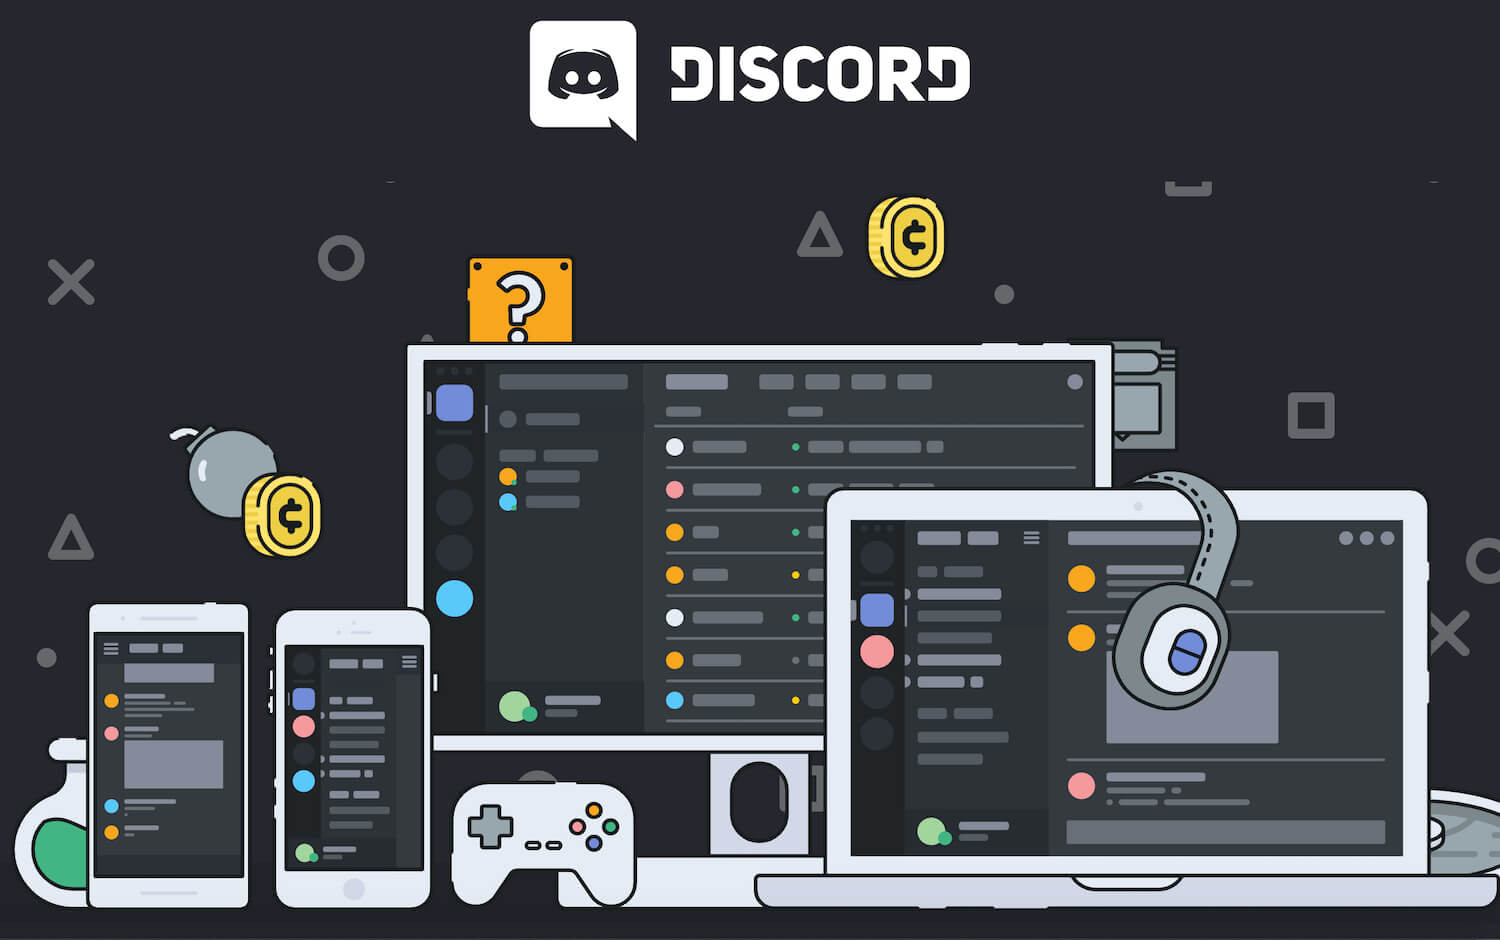 How to Add Bots to Discord Server in 2020